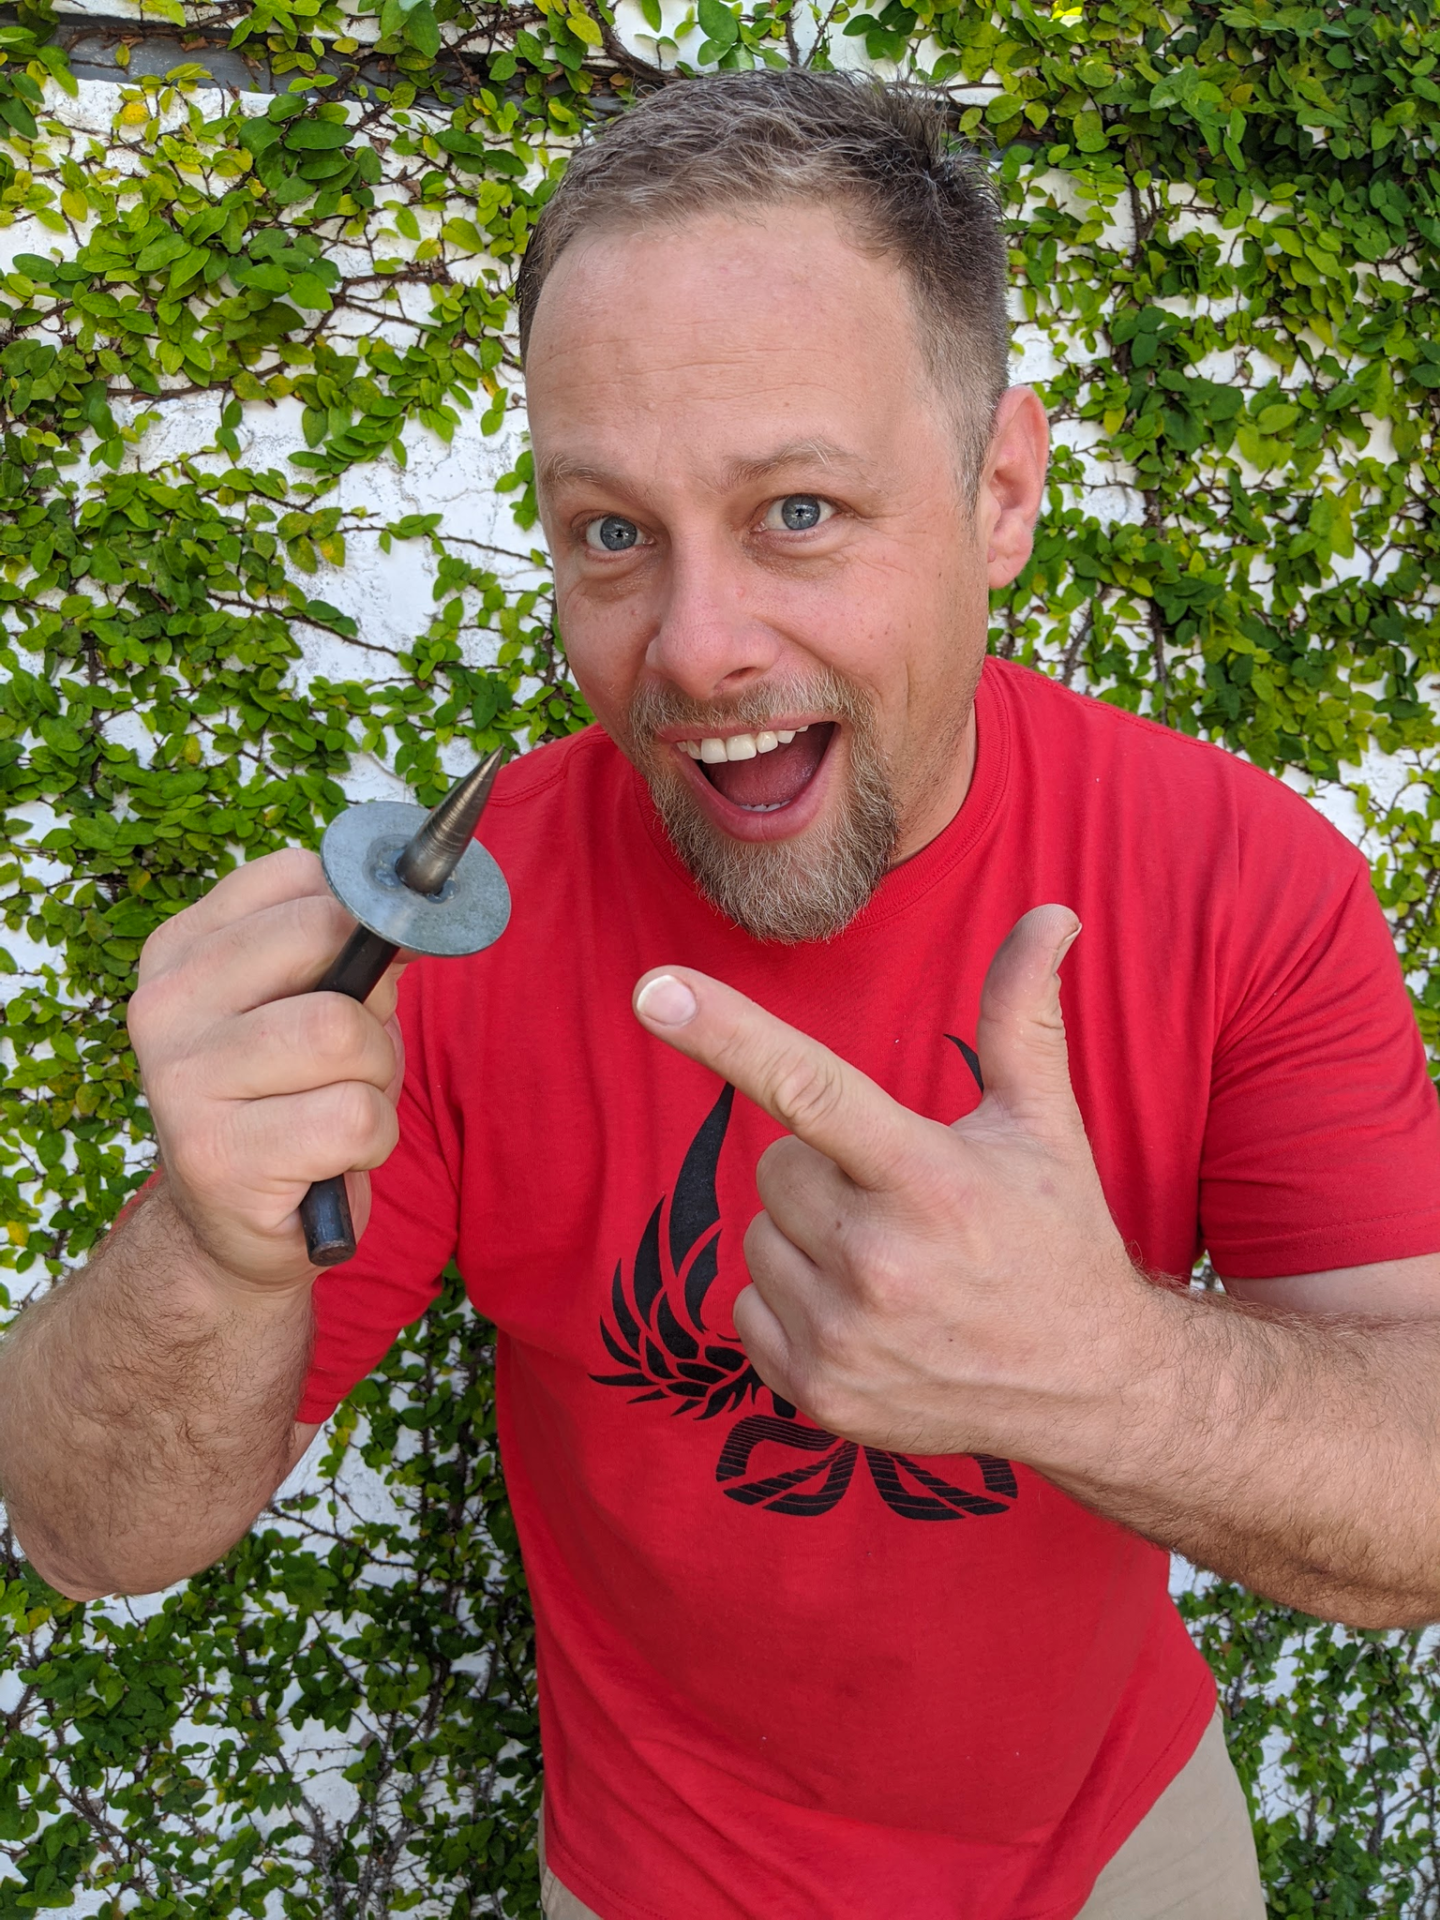 Armor-Dilloz founder Cory Boehne and his tire-stabbing tool